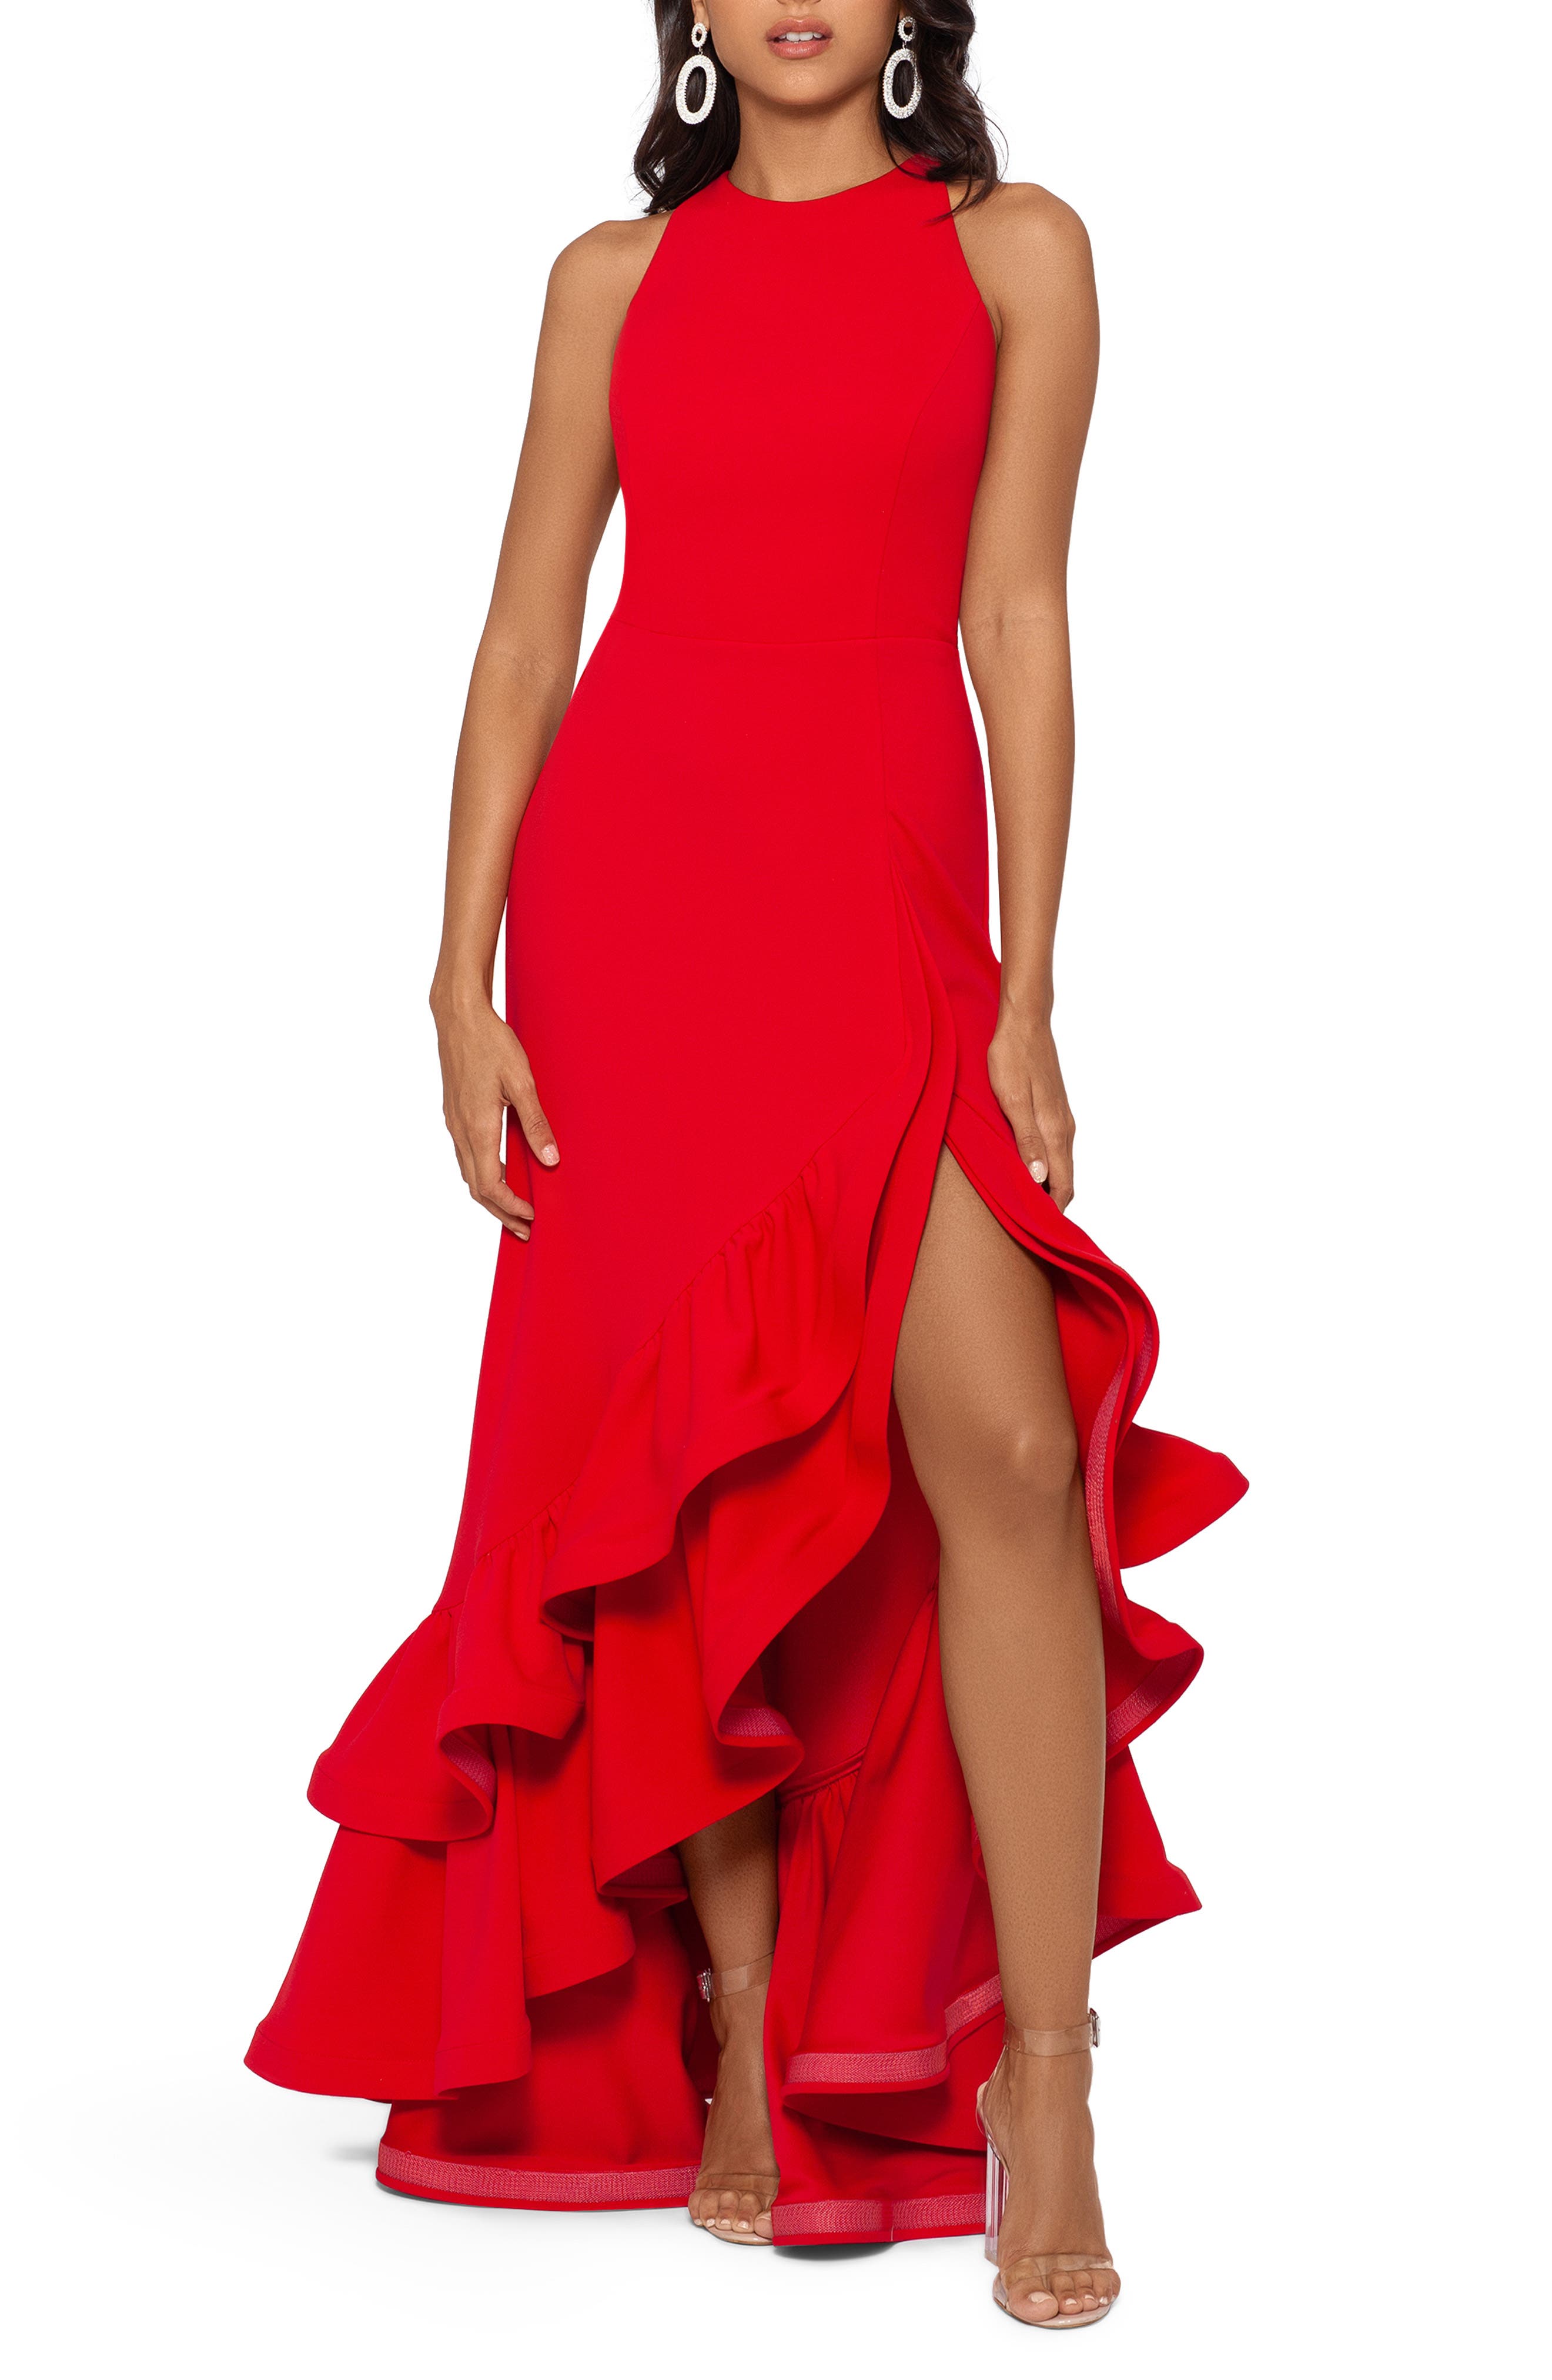 formal red maxi dress,ball gown betsy and adam dresses,short betsy and adam dresses,red split dress,elegant red dress outfit,dinner dresses for ladies,formal elegant flowy dresses,womens formal dresses,betsy adam dresses nordstrom,betsy and adam by jaslene dresses,prom betsy adam dress,formal ankle-length dress,formal red corset dress,formal long dress,formal cute long dresses,red christmas ball gown,